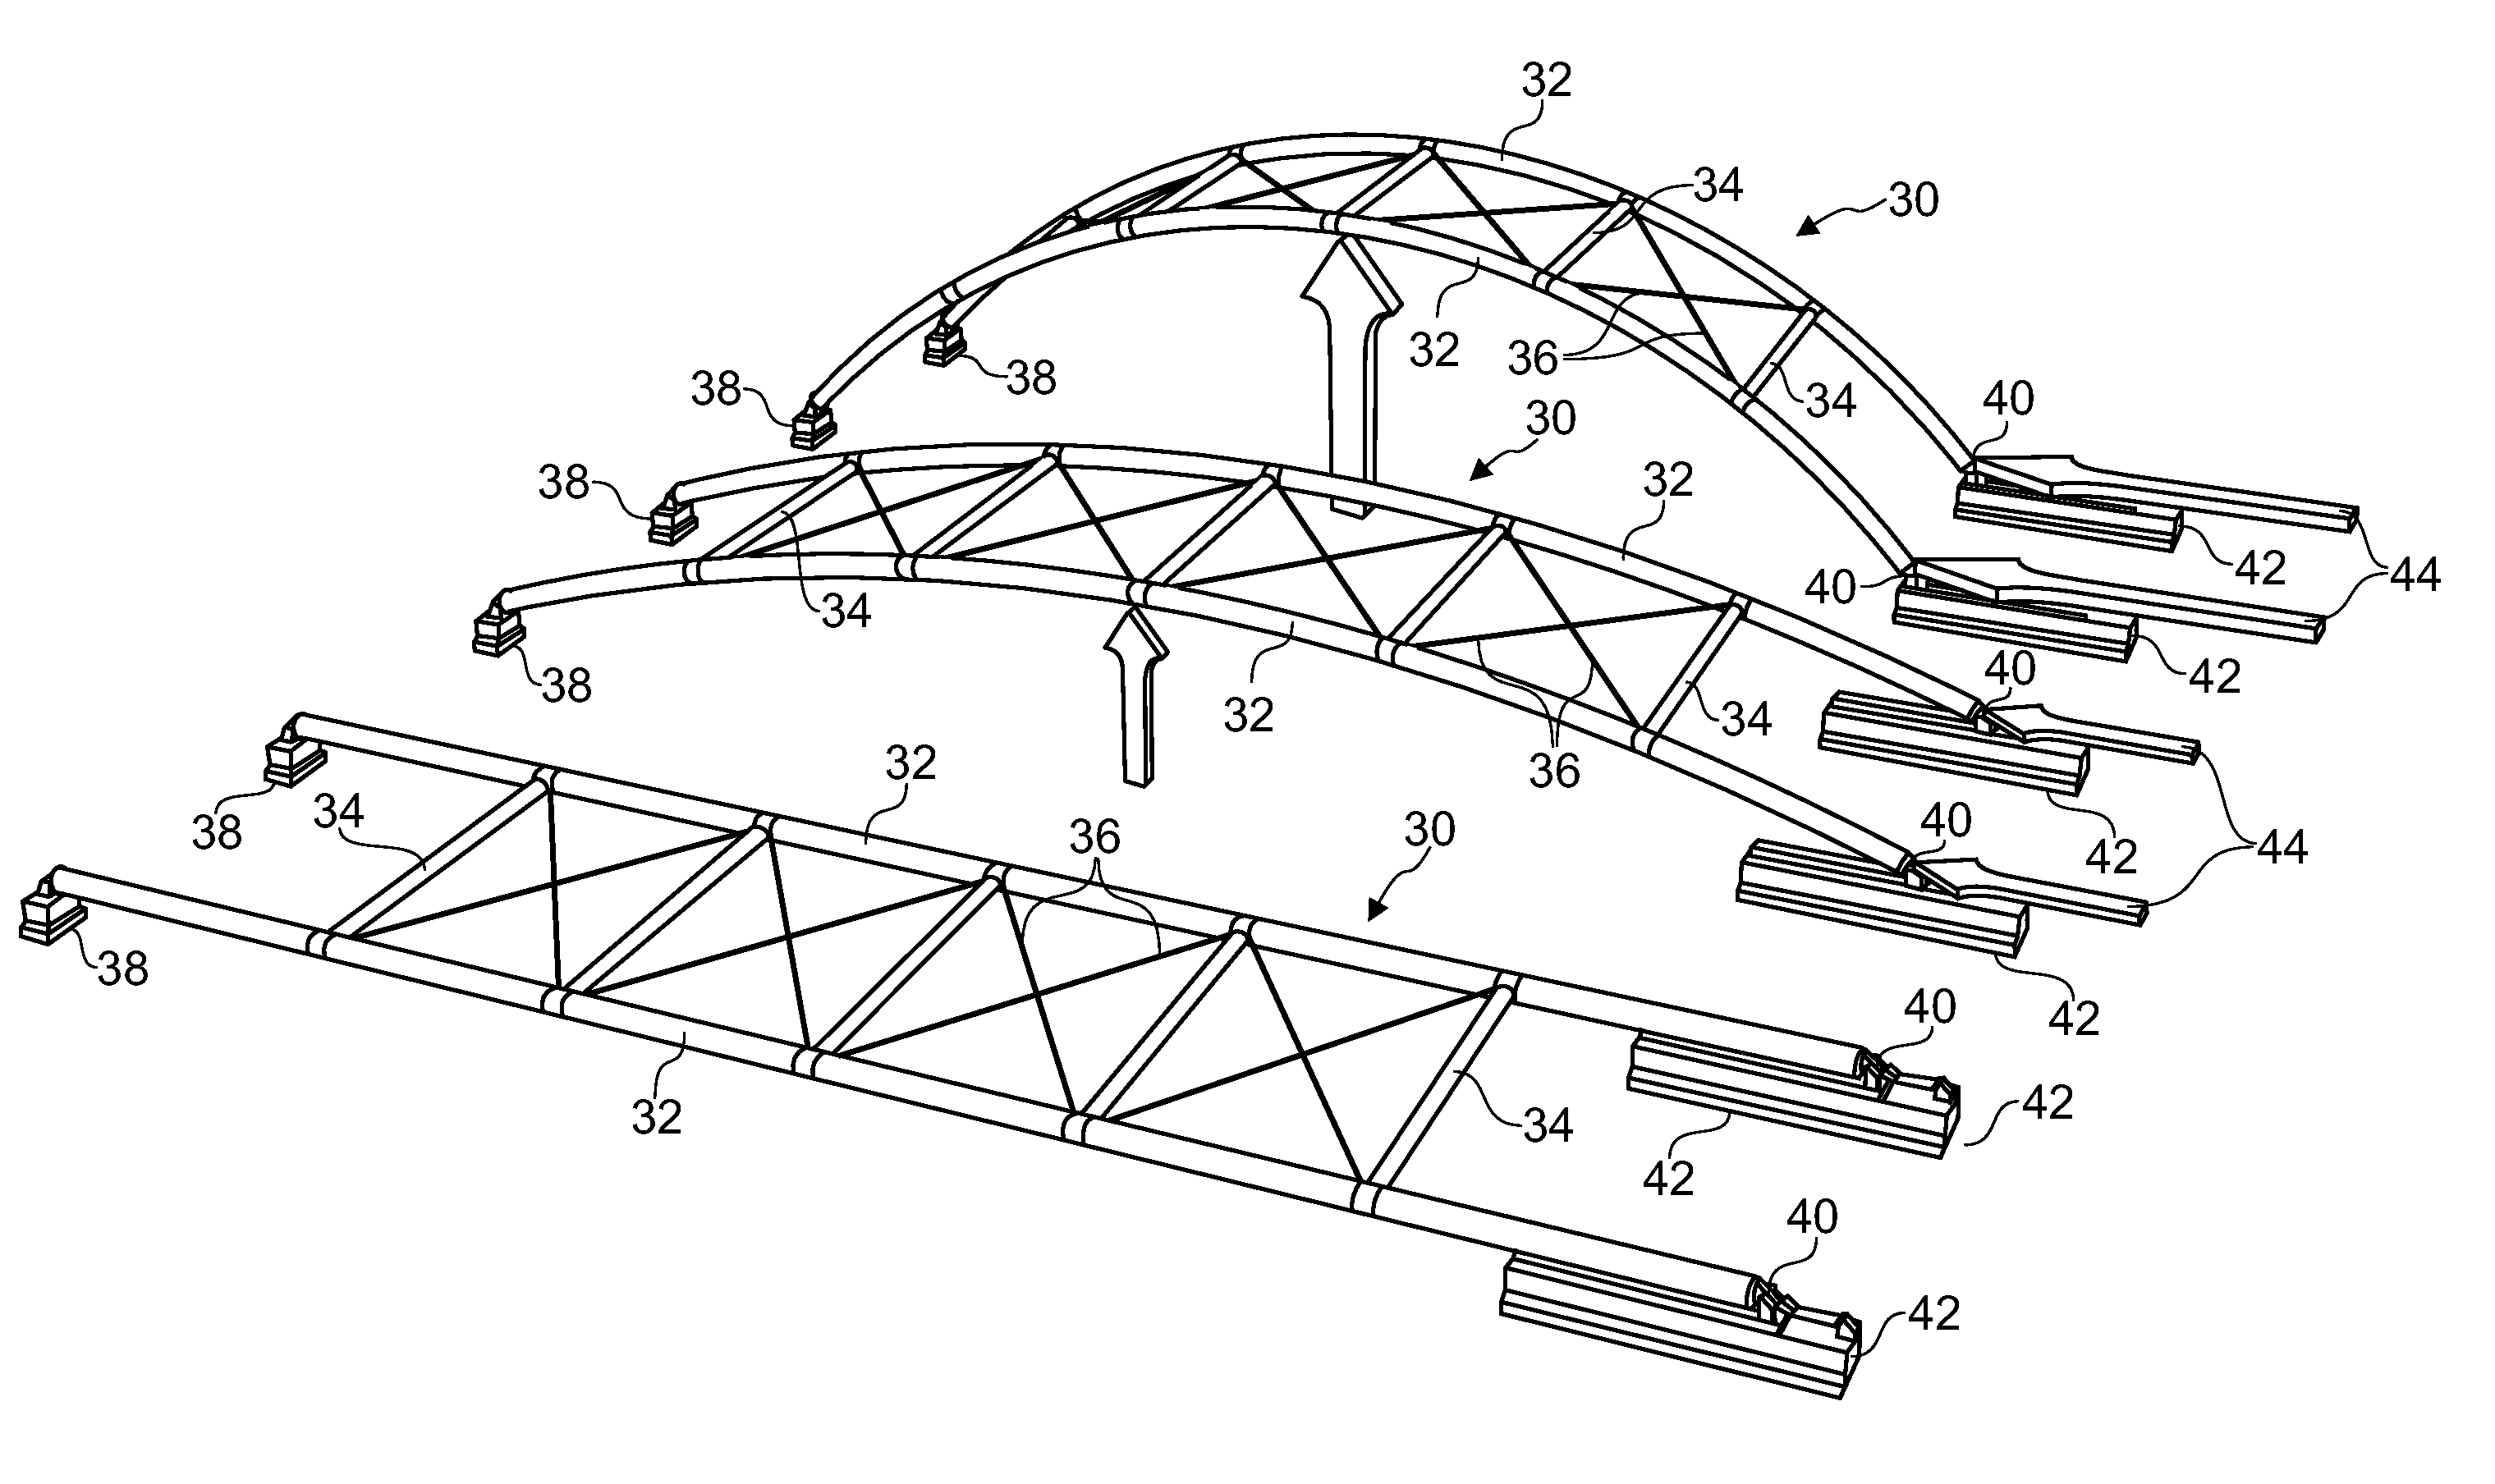 Supporting arch structure construction method